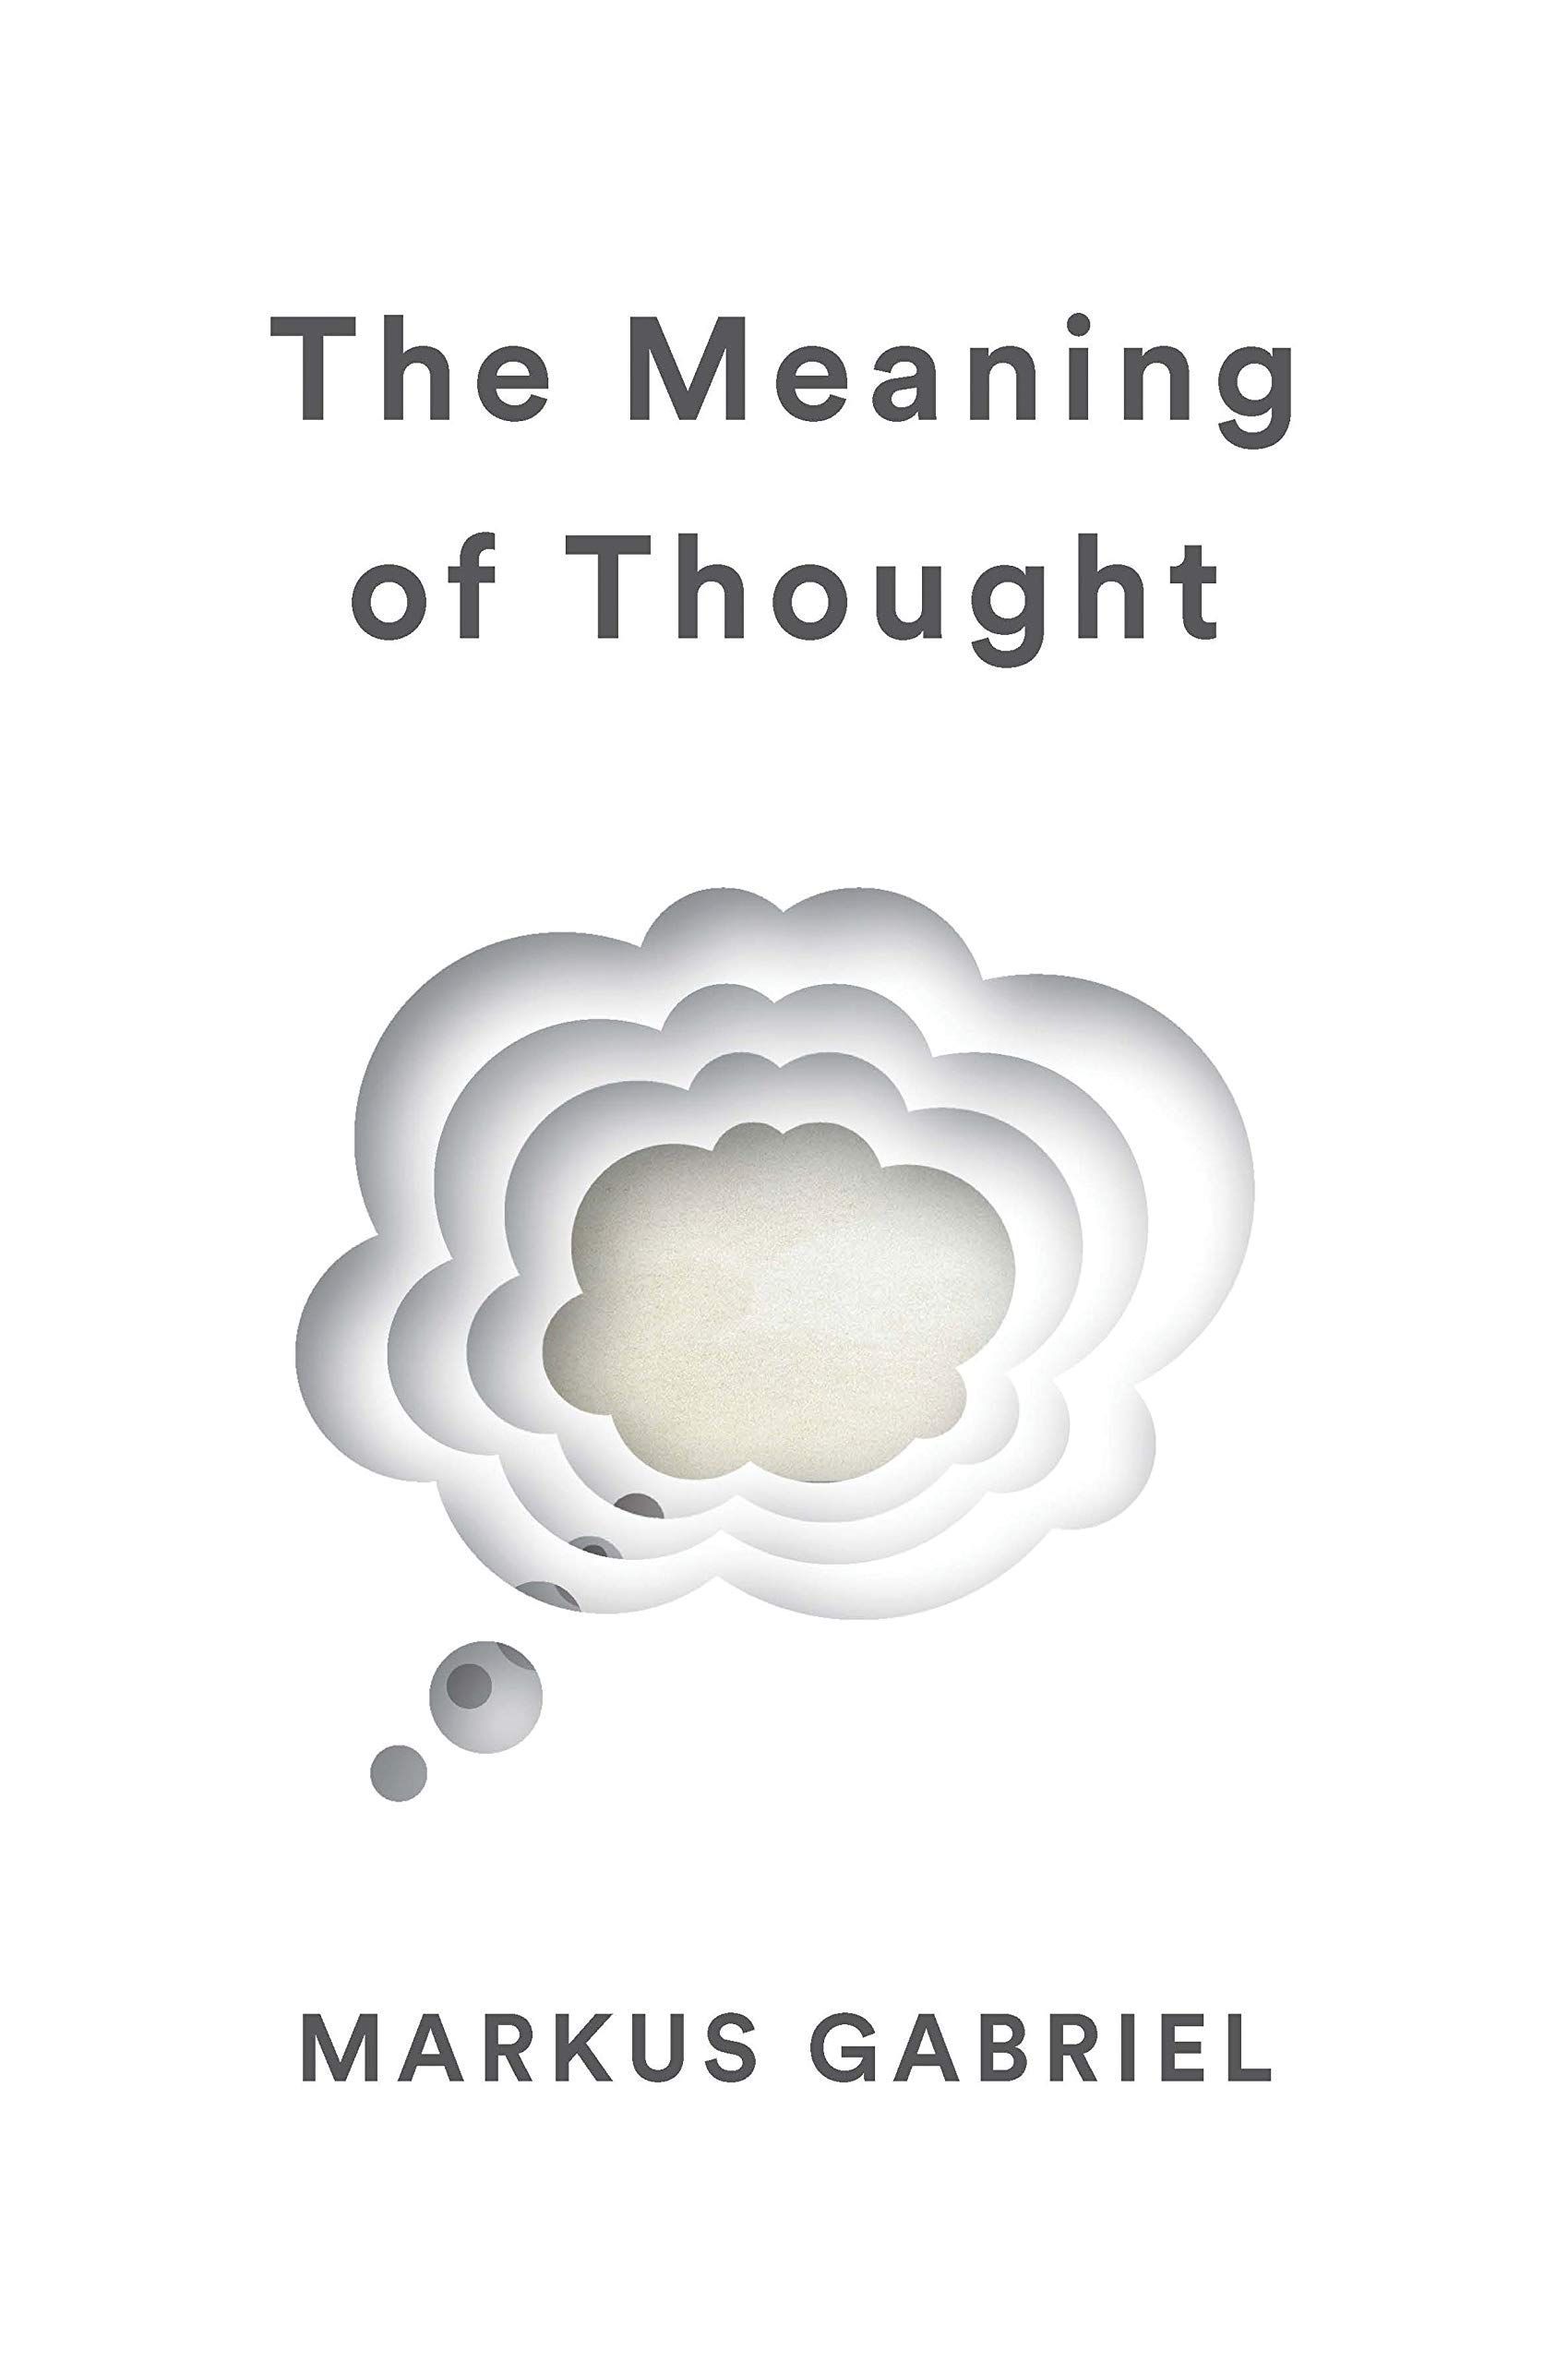 The Body of Thought: On Markus Gabriel’s “The Meaning of Thought”